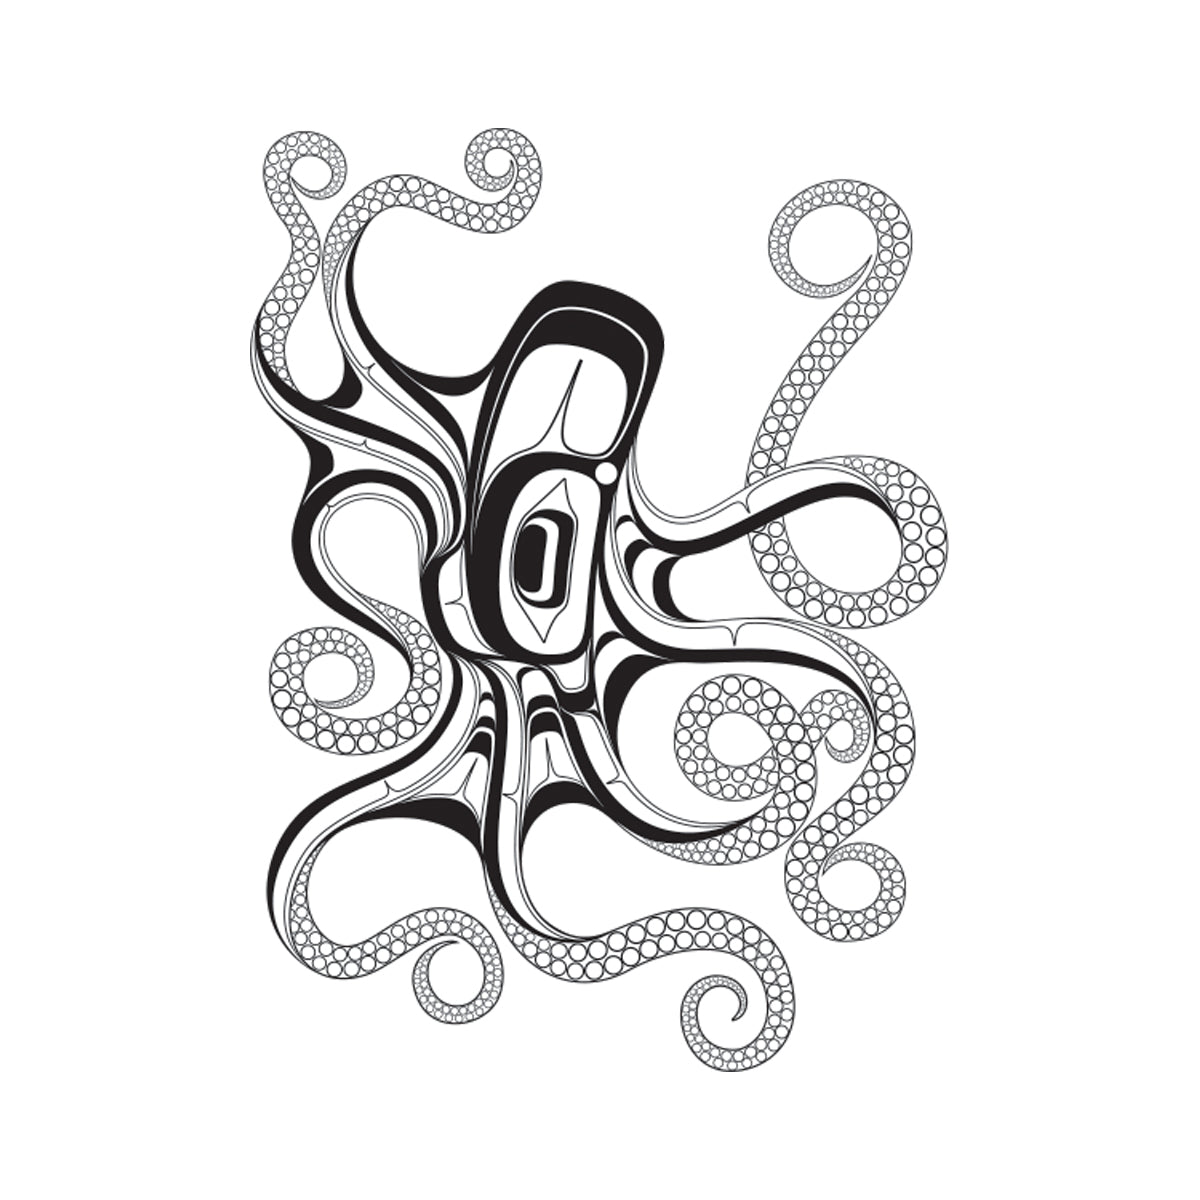 Tattoo E Swanson Octopus - Tattoo E Swanson Octopus -  - House of Himwitsa Native Art Gallery and Gifts